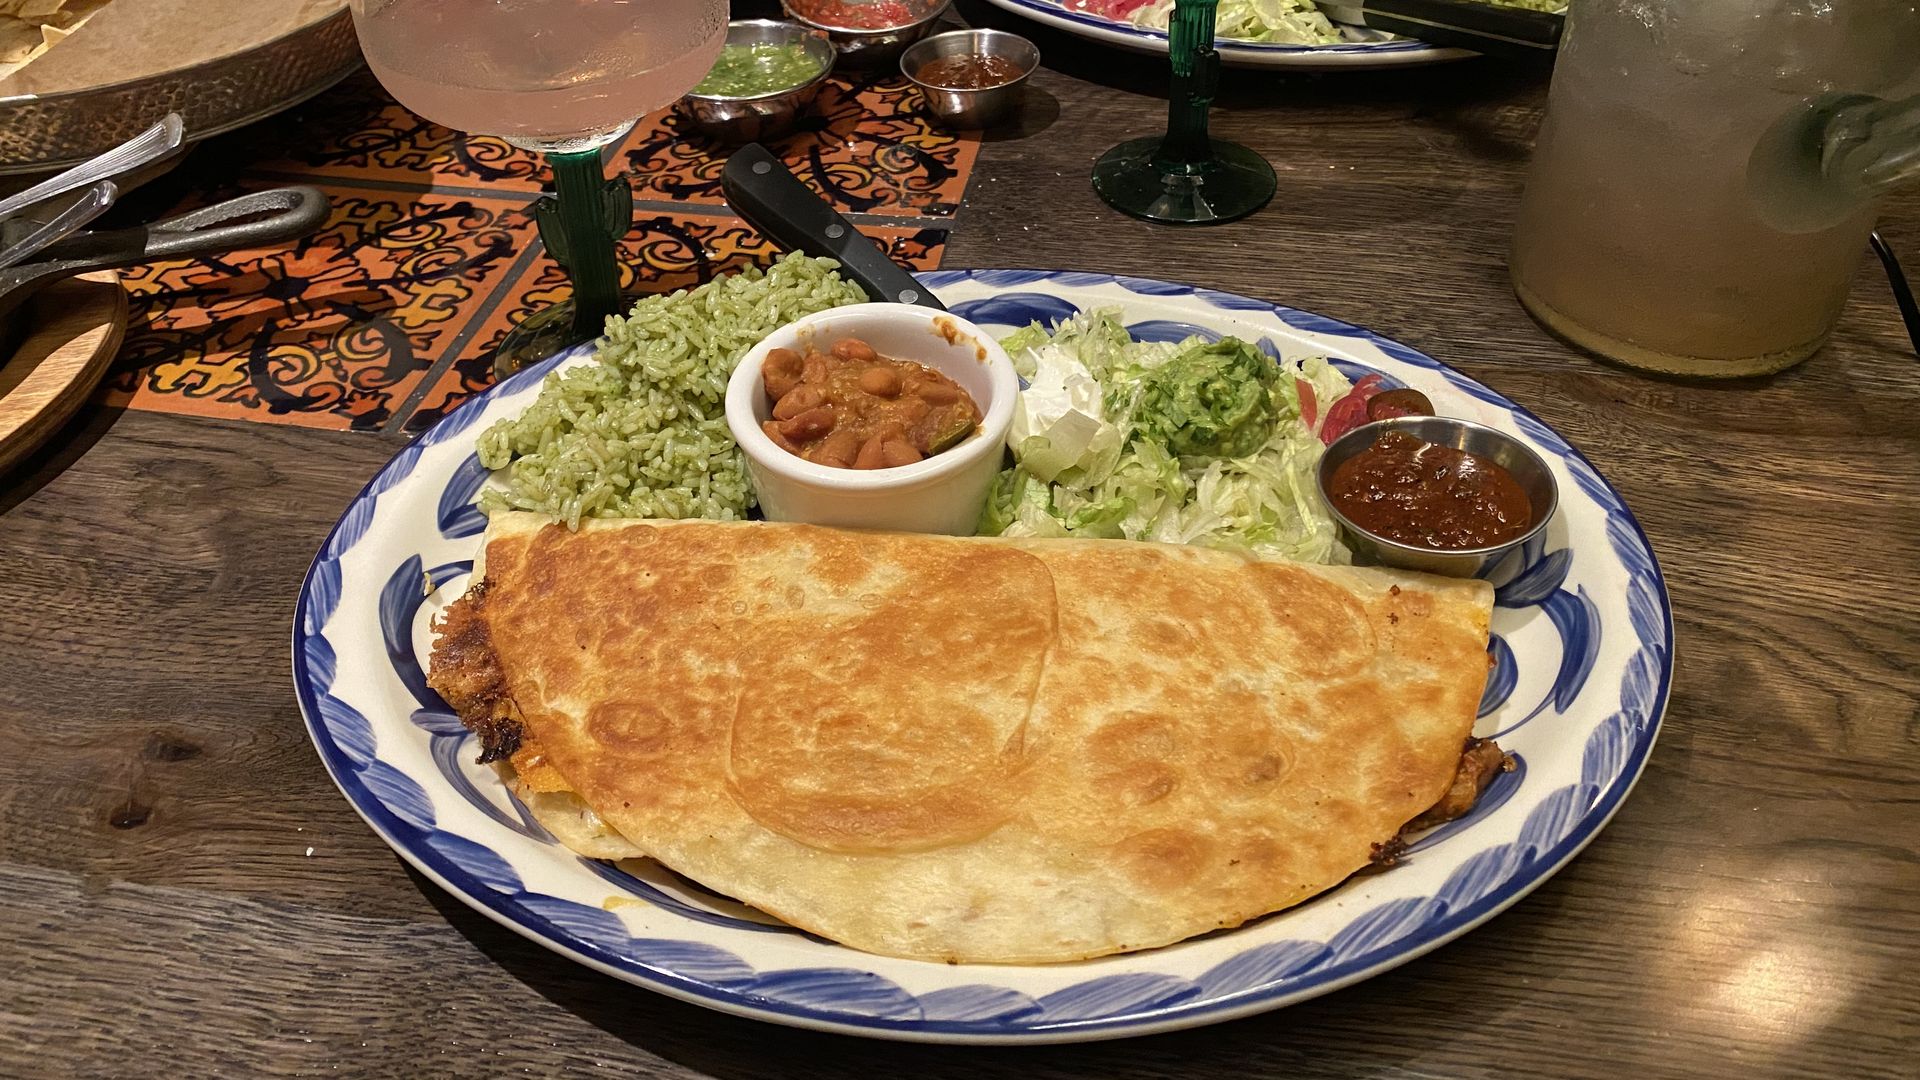 A quesadilla with cilantro rice and boraccho beans on a plate at El Segundo, next to a margarita glass